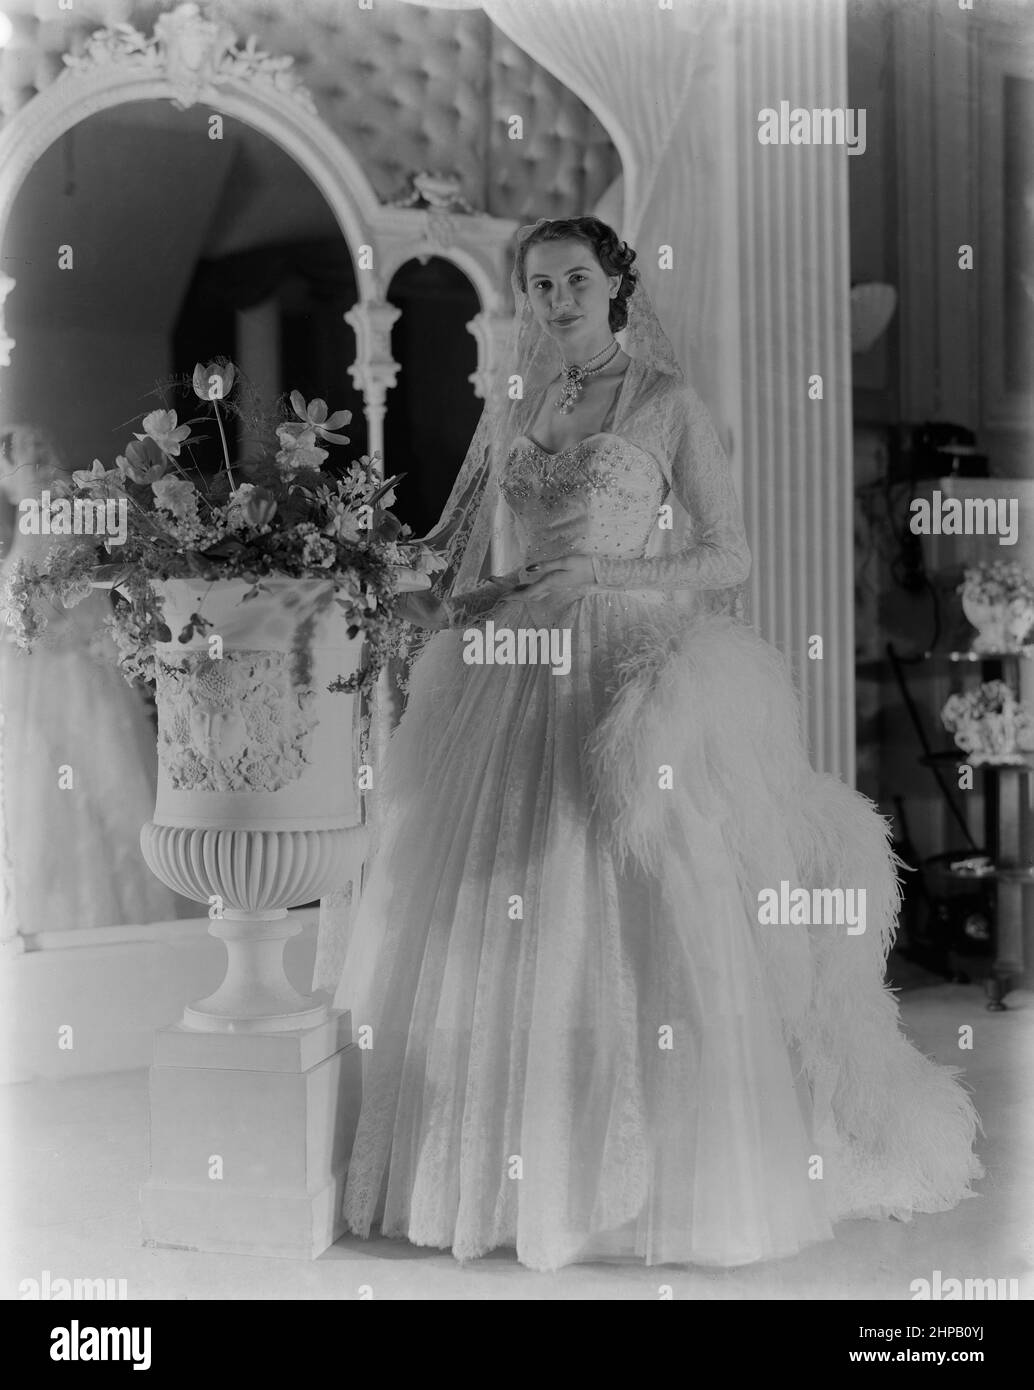 A British fashion model, from a professional photoshoot from the 1950s. Modelling a very elaborate gown. Stock Photo